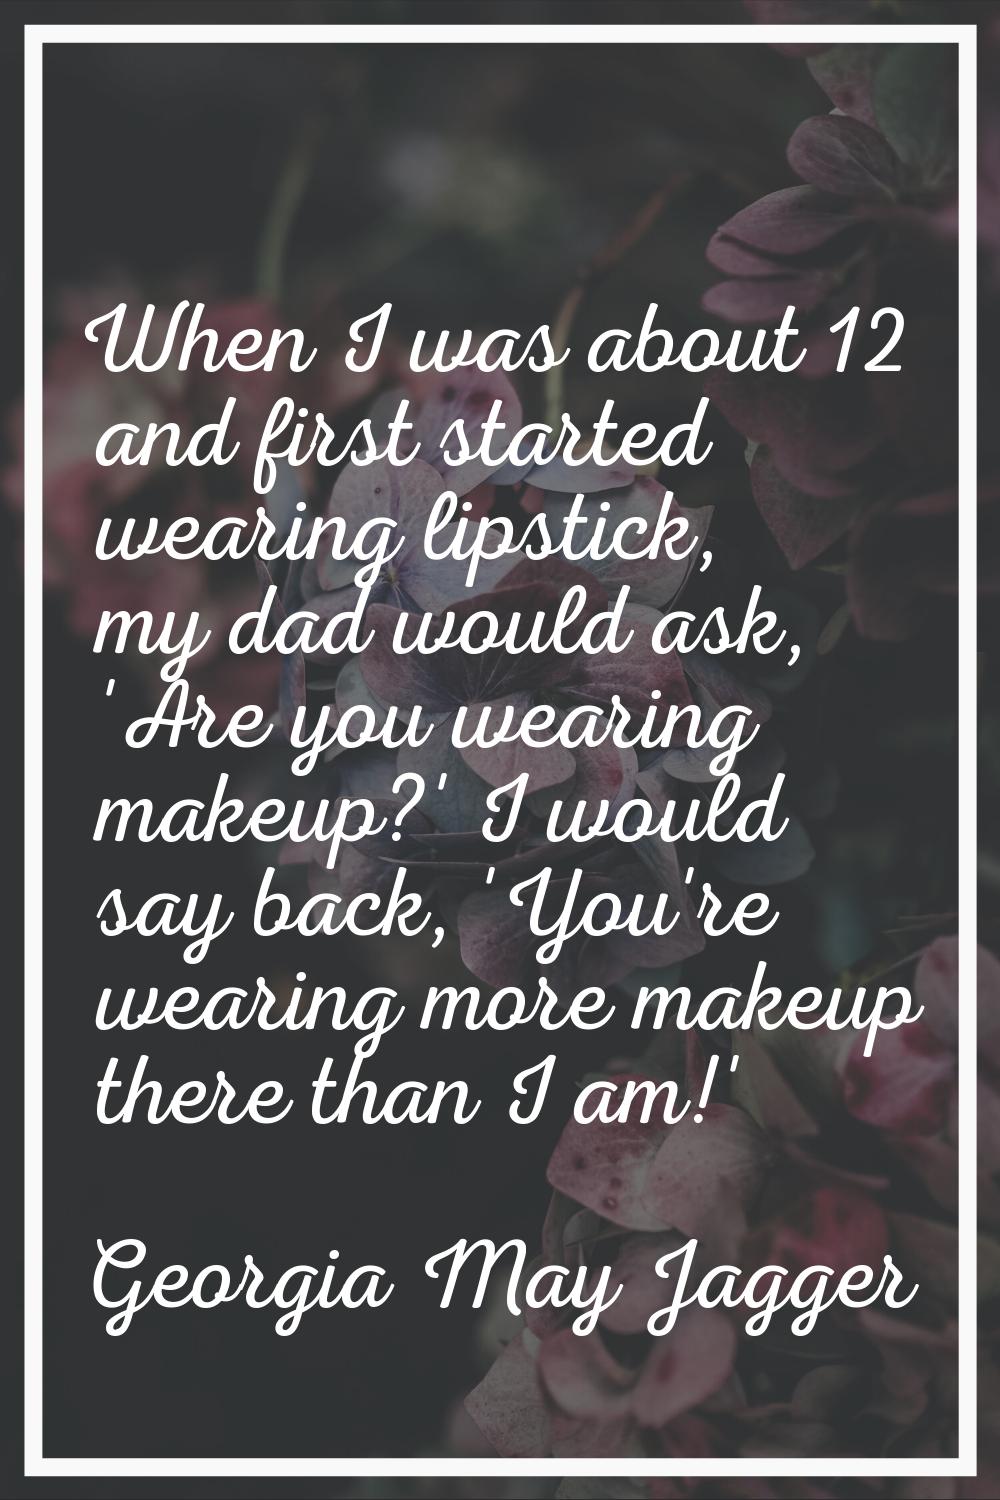 When I was about 12 and first started wearing lipstick, my dad would ask, 'Are you wearing makeup?'